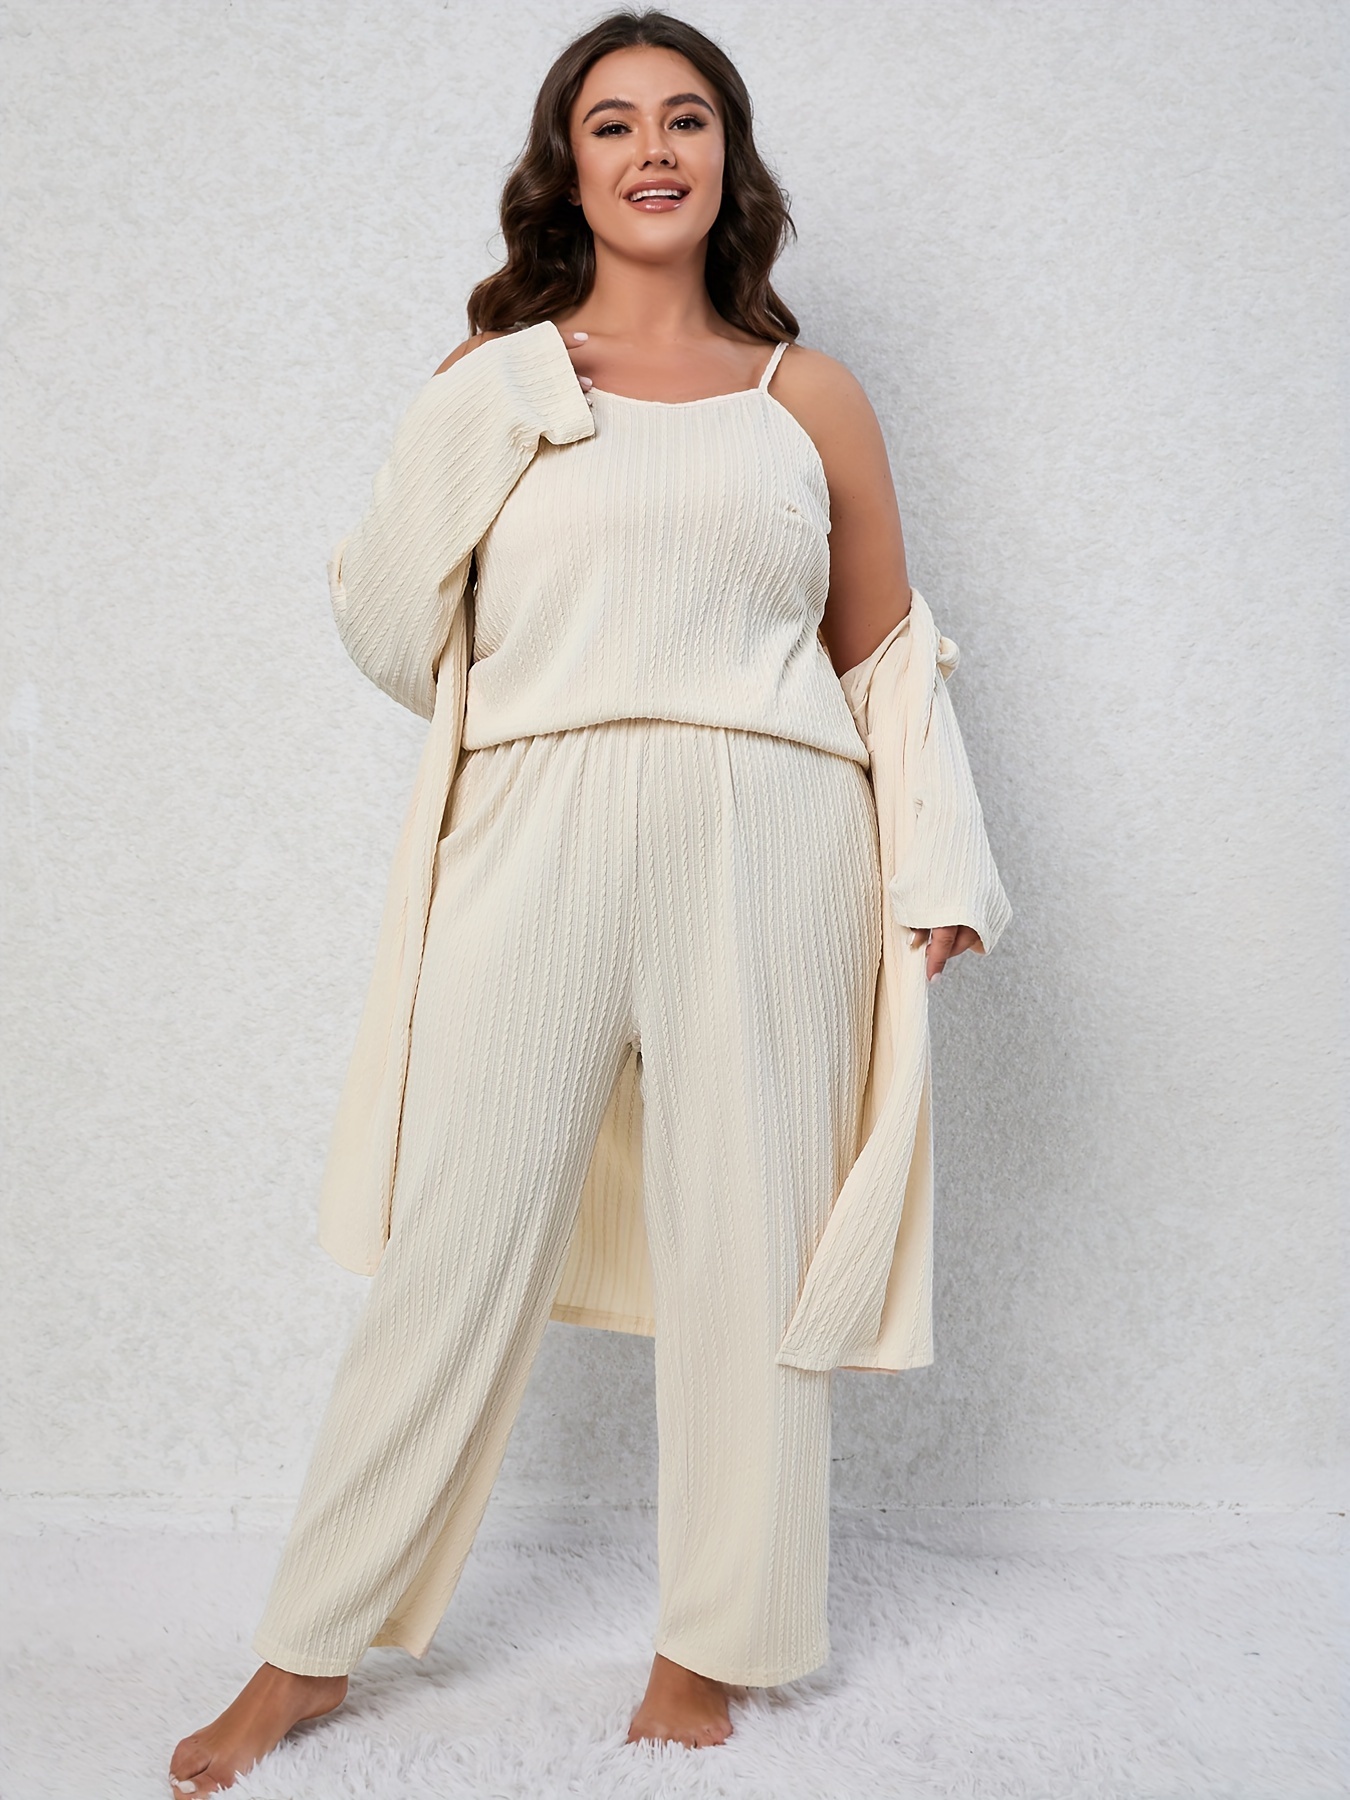 Plus Size Casual Lounge Set, Women's Plus Solid Textured Cami Top & Wide  Leg Pants & Open Front Robe Pajama Three Piece Set